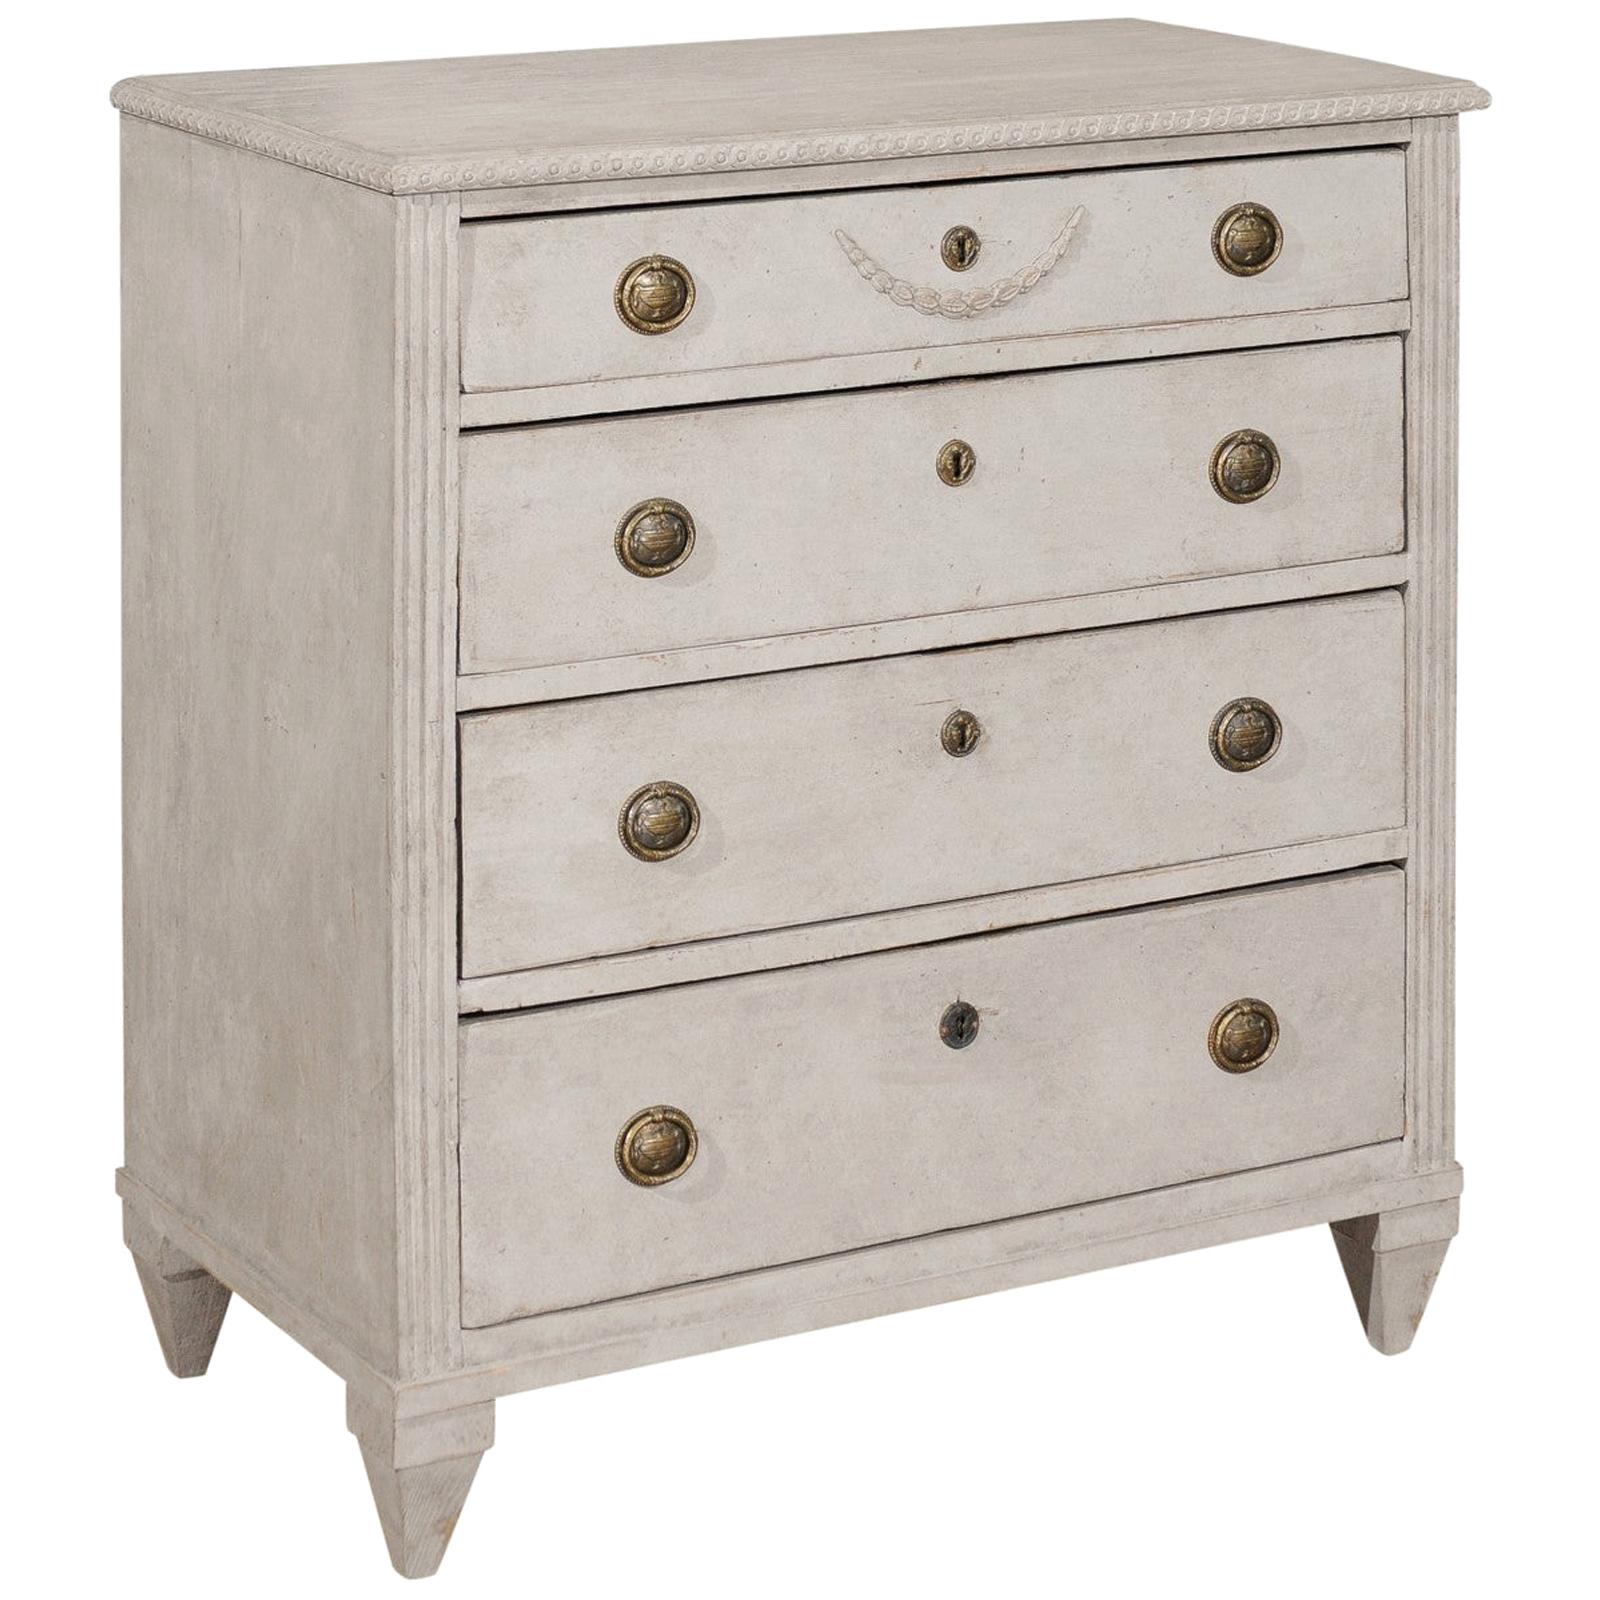 Swedish Gustavian Style 19th Century Painted Wood Four-Drawer Chest with Swag